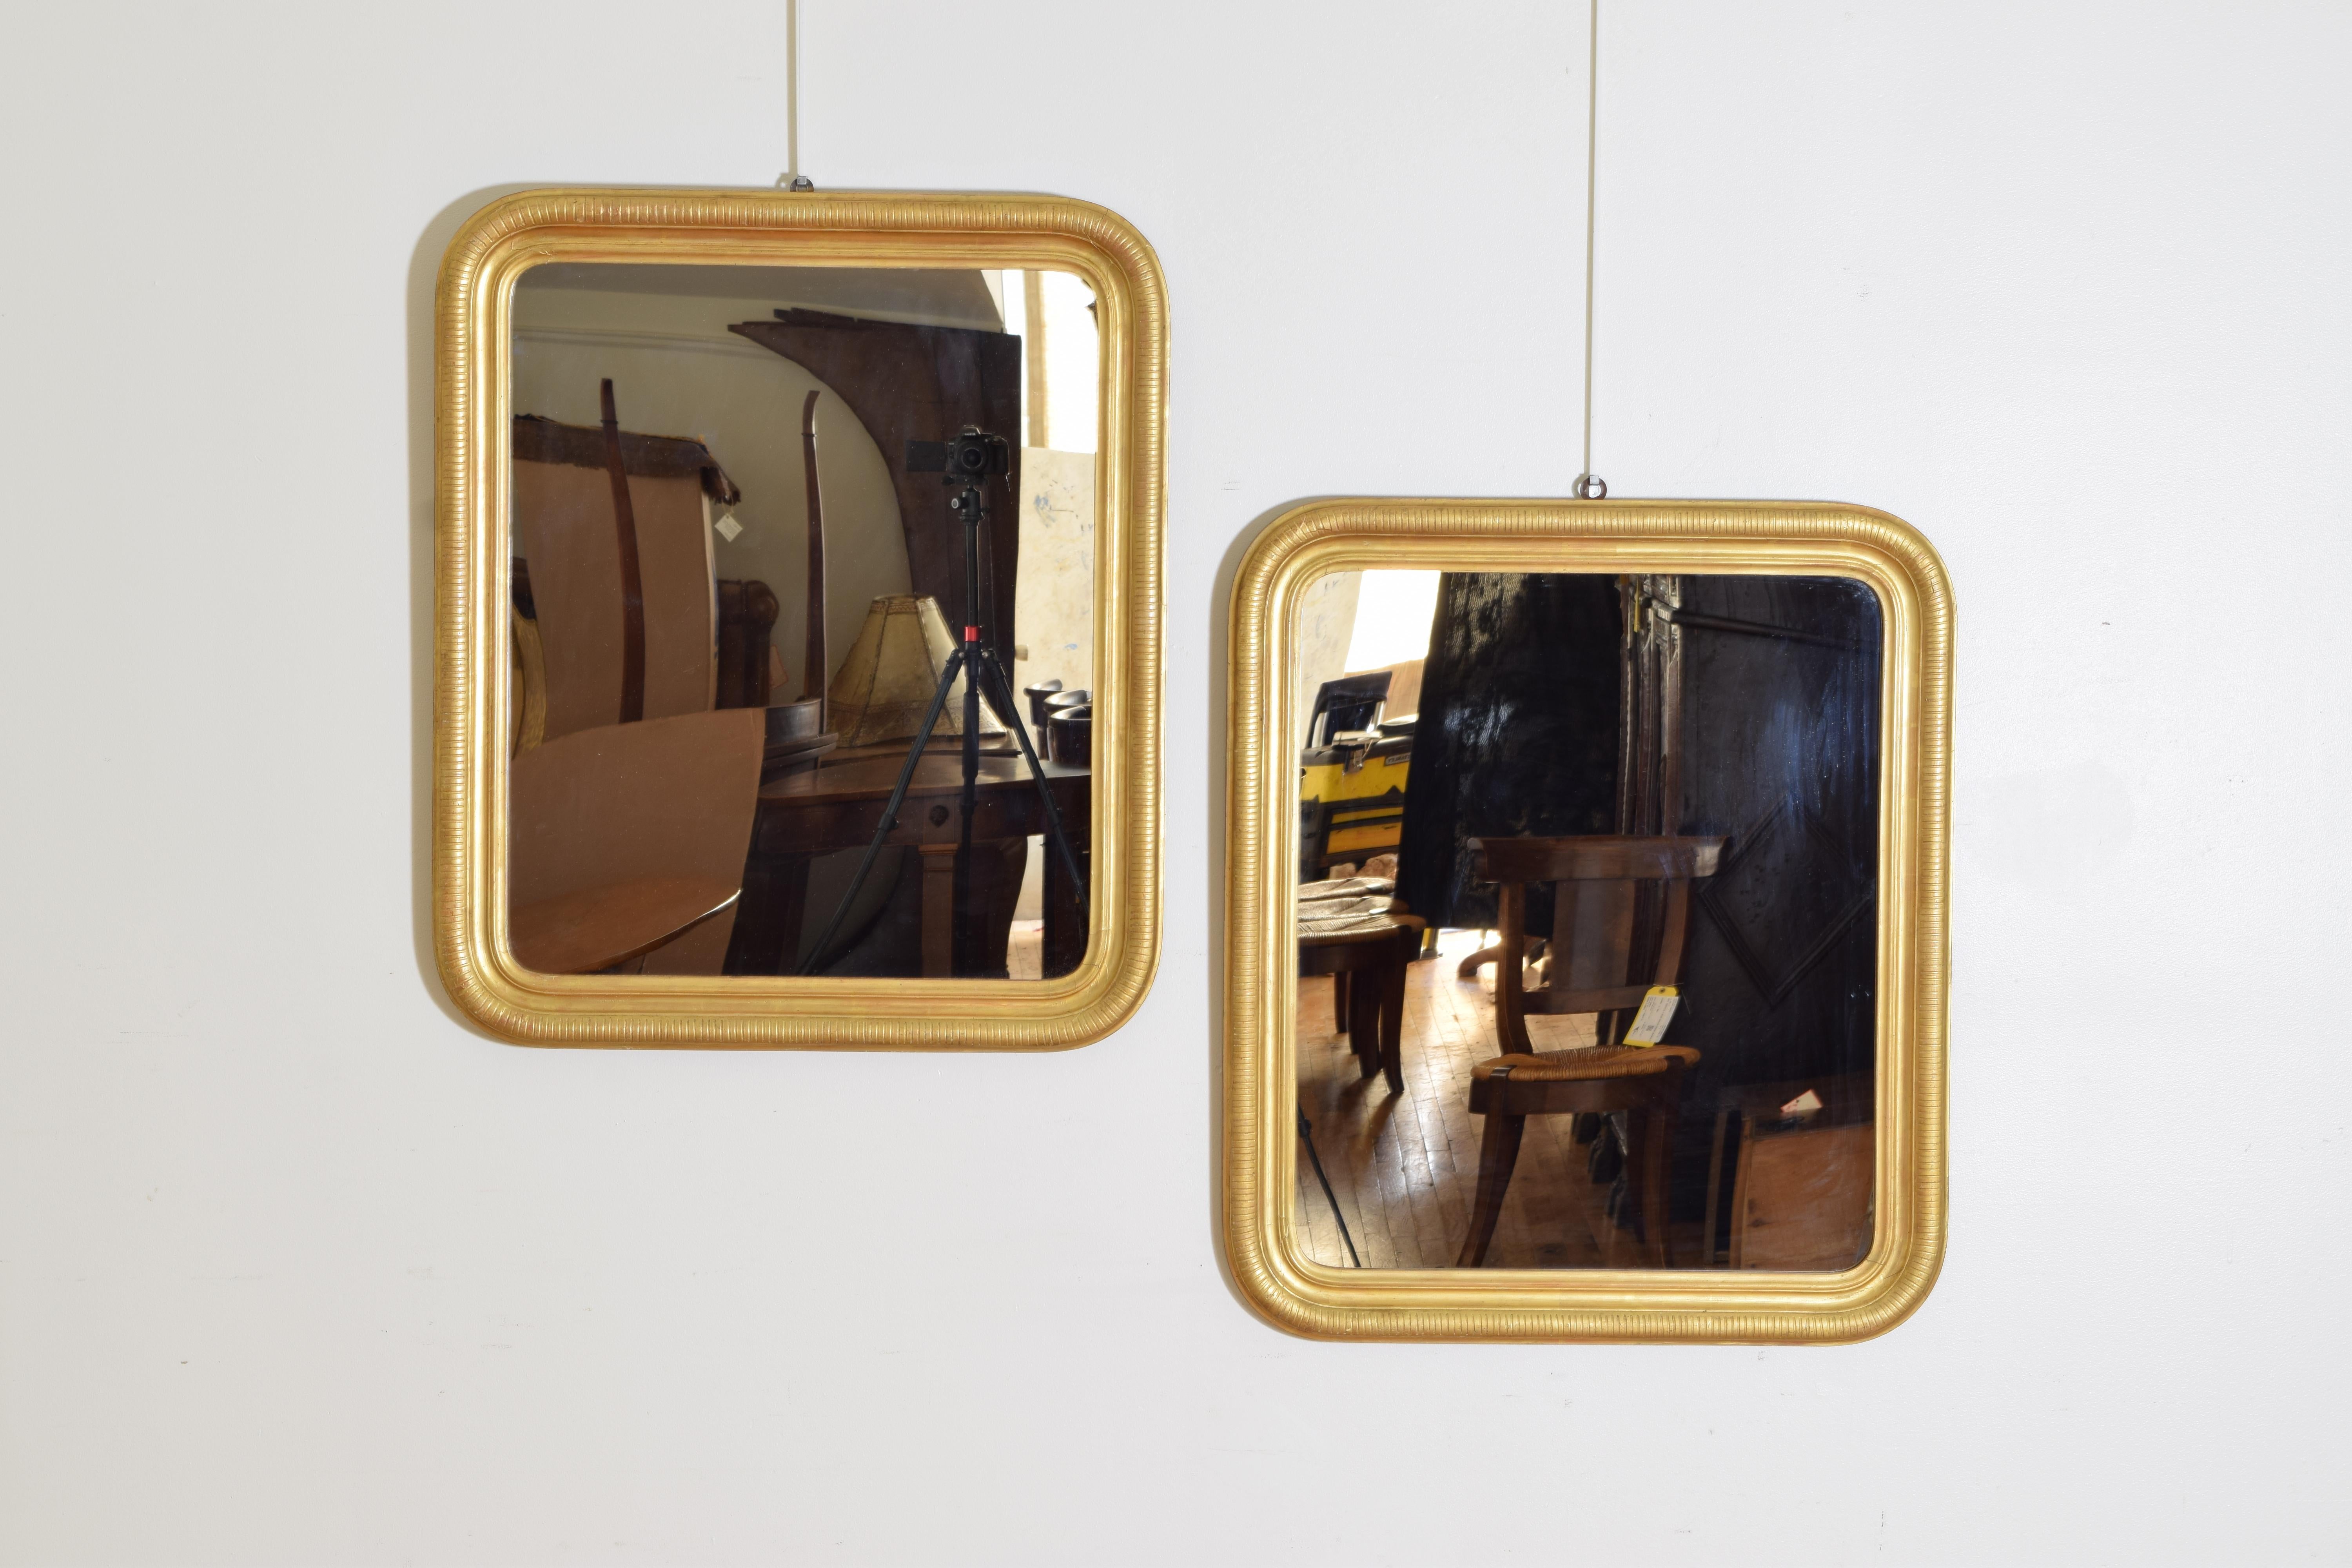 Each mirror of rectangular form with rounded edges, a series of moldings make up the frames, the outermost with incised ribbing, the mirror plates modern